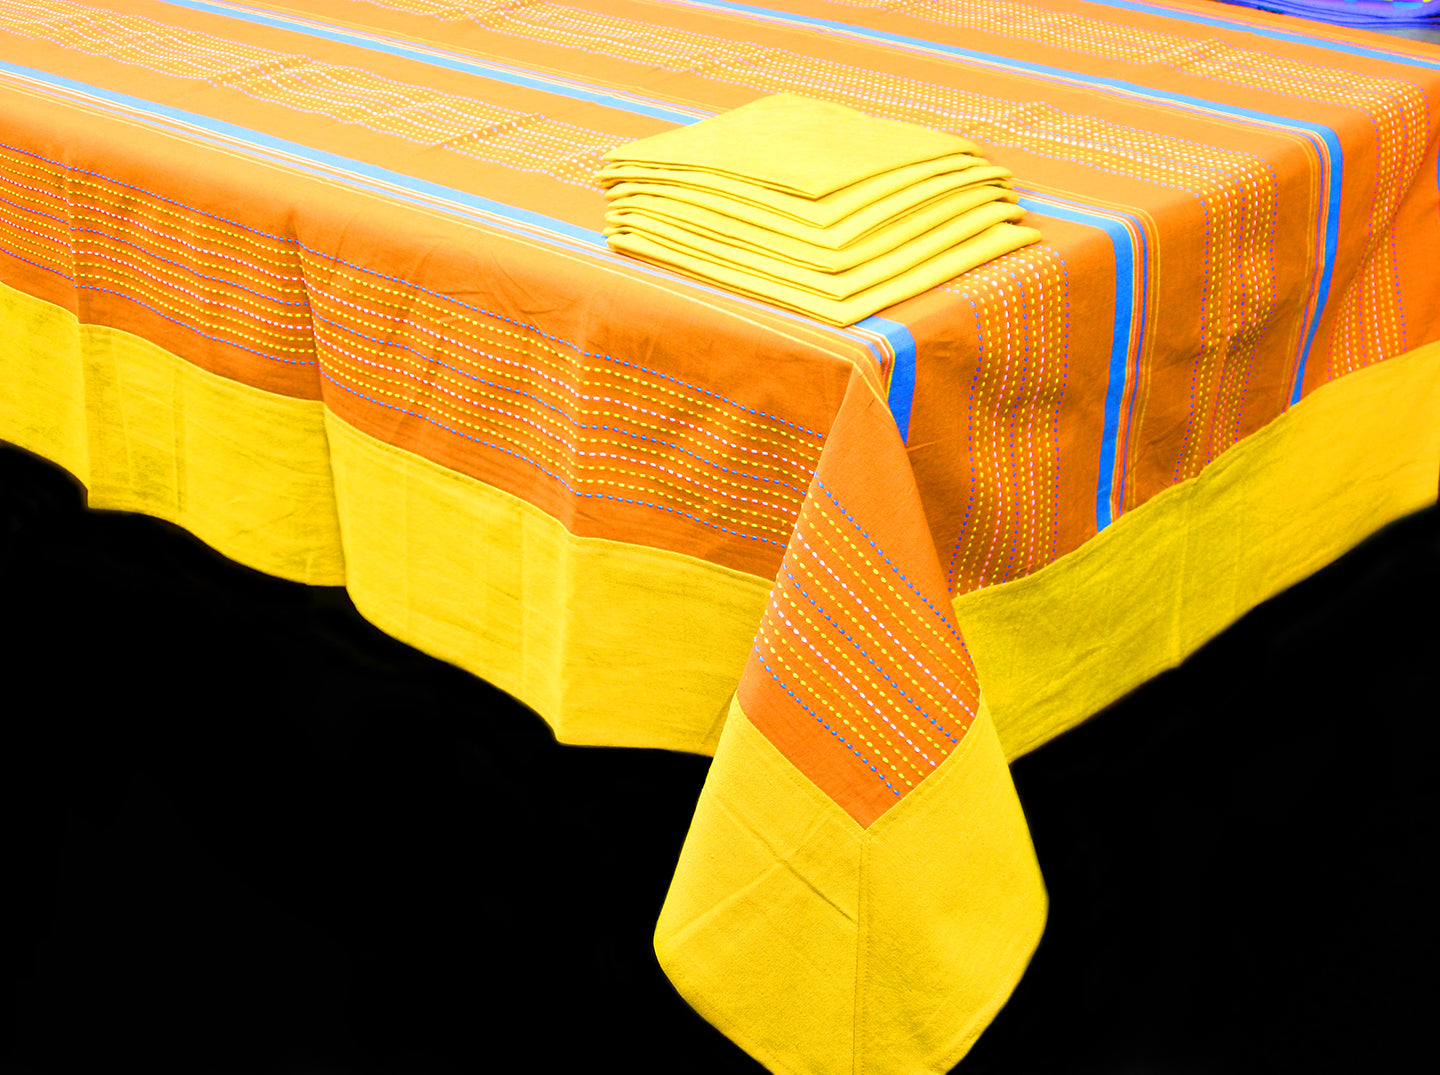 Alpha Orange Woven Cotton Stripes Table Cover(1 Pc) online in India